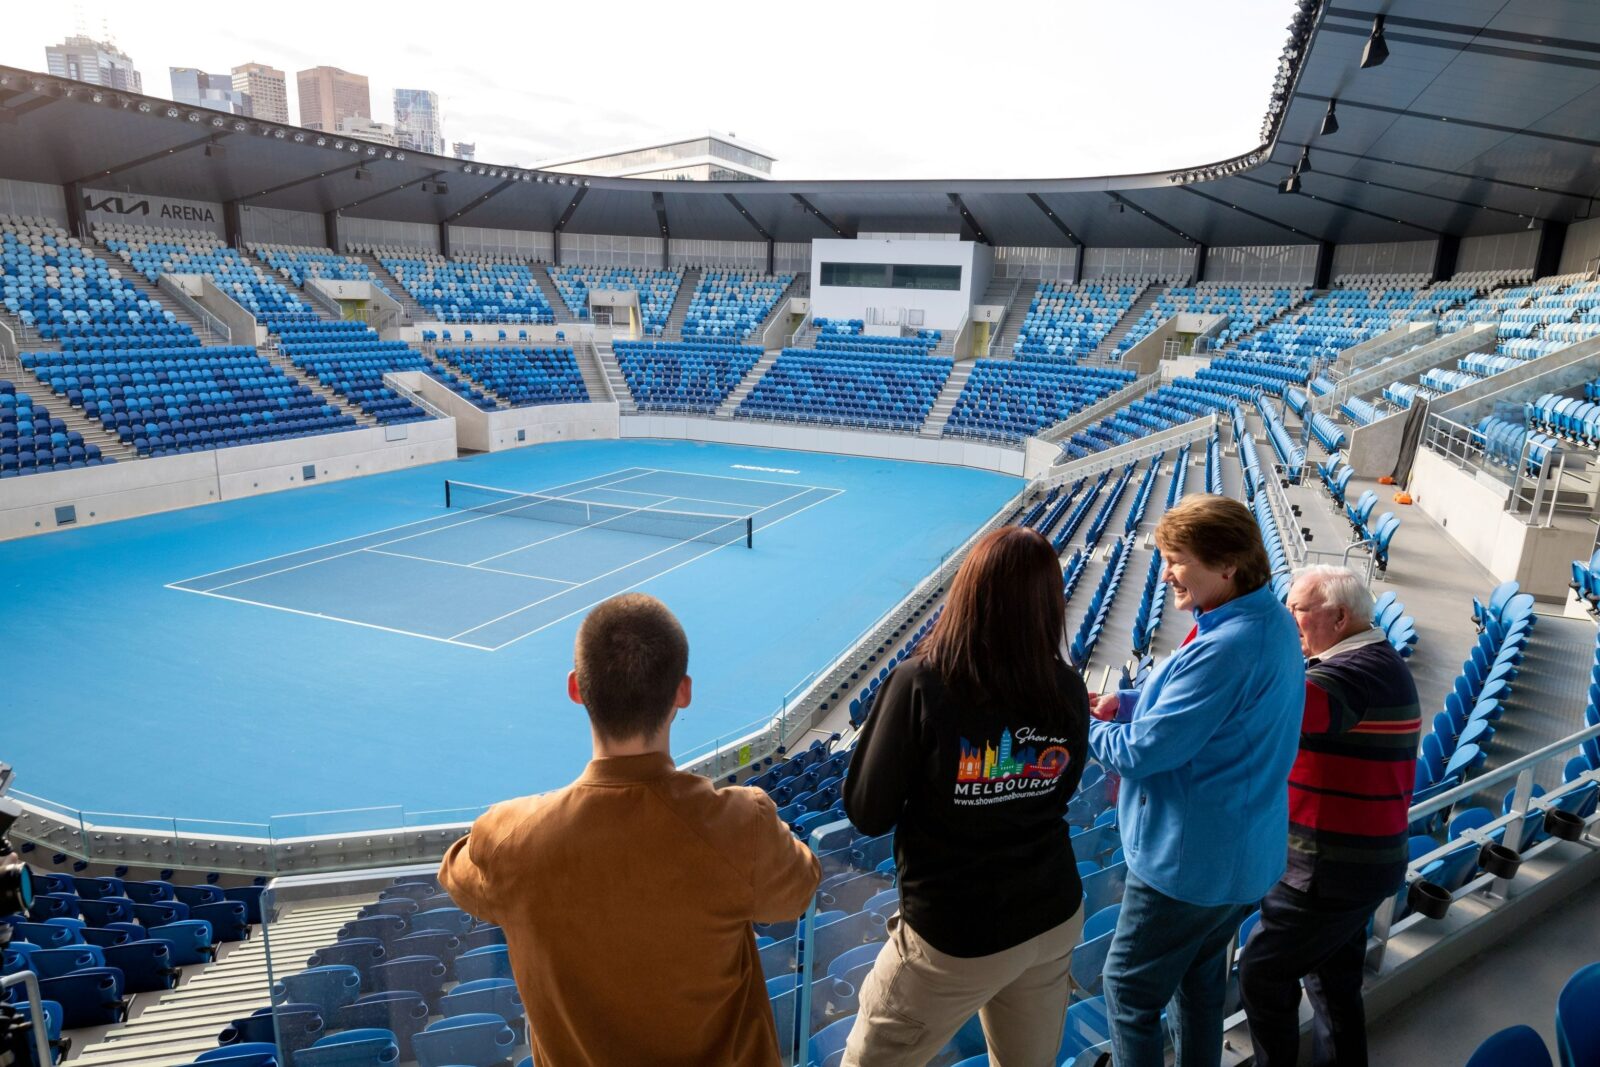 A group of four people are looking at a blue tennis court from the stands. One is a tour guide.